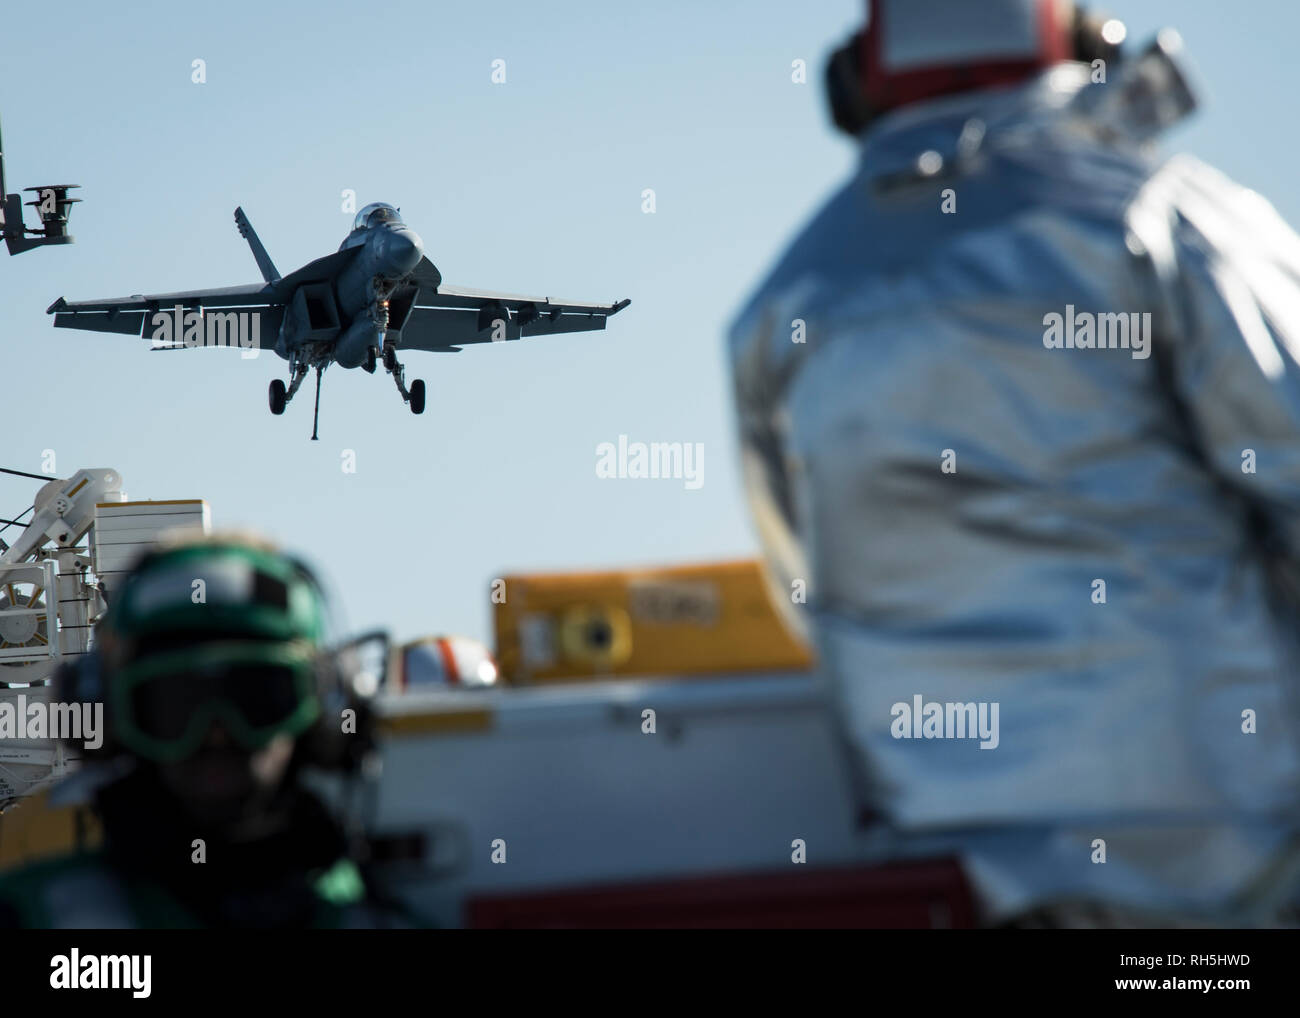 ATLANTIC OCEAN (Jan 19, 2018) -- An F/A-18F Super Hornet, assigned to the 'Black Lions' of Strike Fighter Squadron (VFA) 213, prepares to land on USS Gerald R. Ford's (CVN 78) flight deck during flight operations. Ford is underway conducting test and evaluation operations. (U.S. Navy photo by Mass Communication Specialist 3rd Class Ryan Carter) Stock Photo